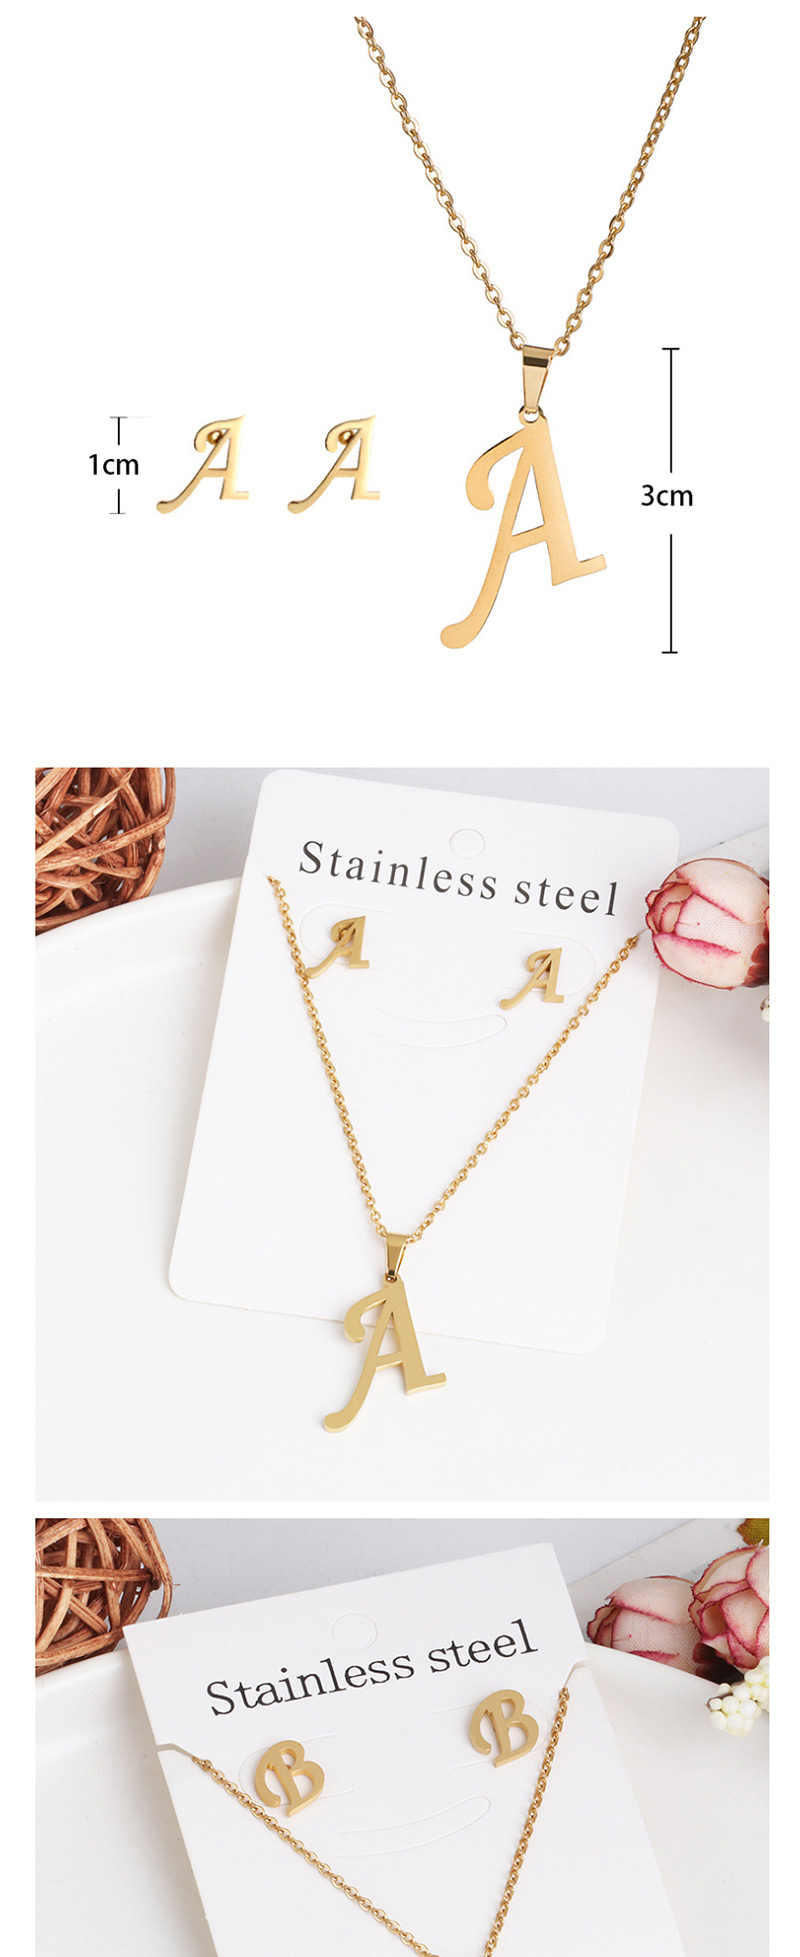 Fashion D Gold Stainless Steel Letter Necklace Earrings Two-piece,Jewelry Sets